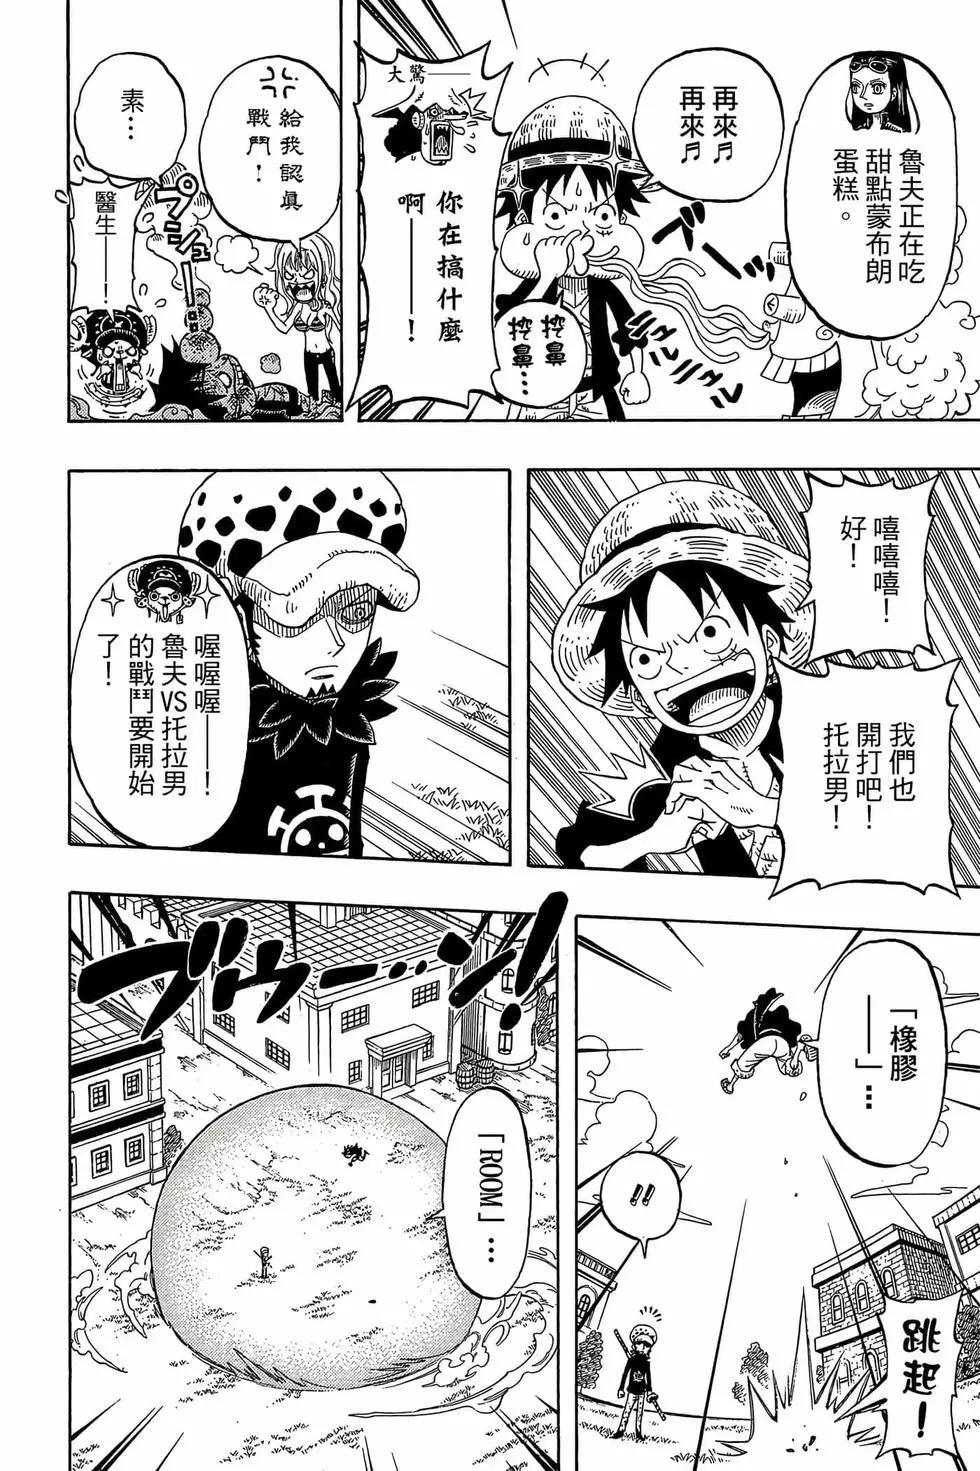 One piece party - 第01卷(1/4) - 1